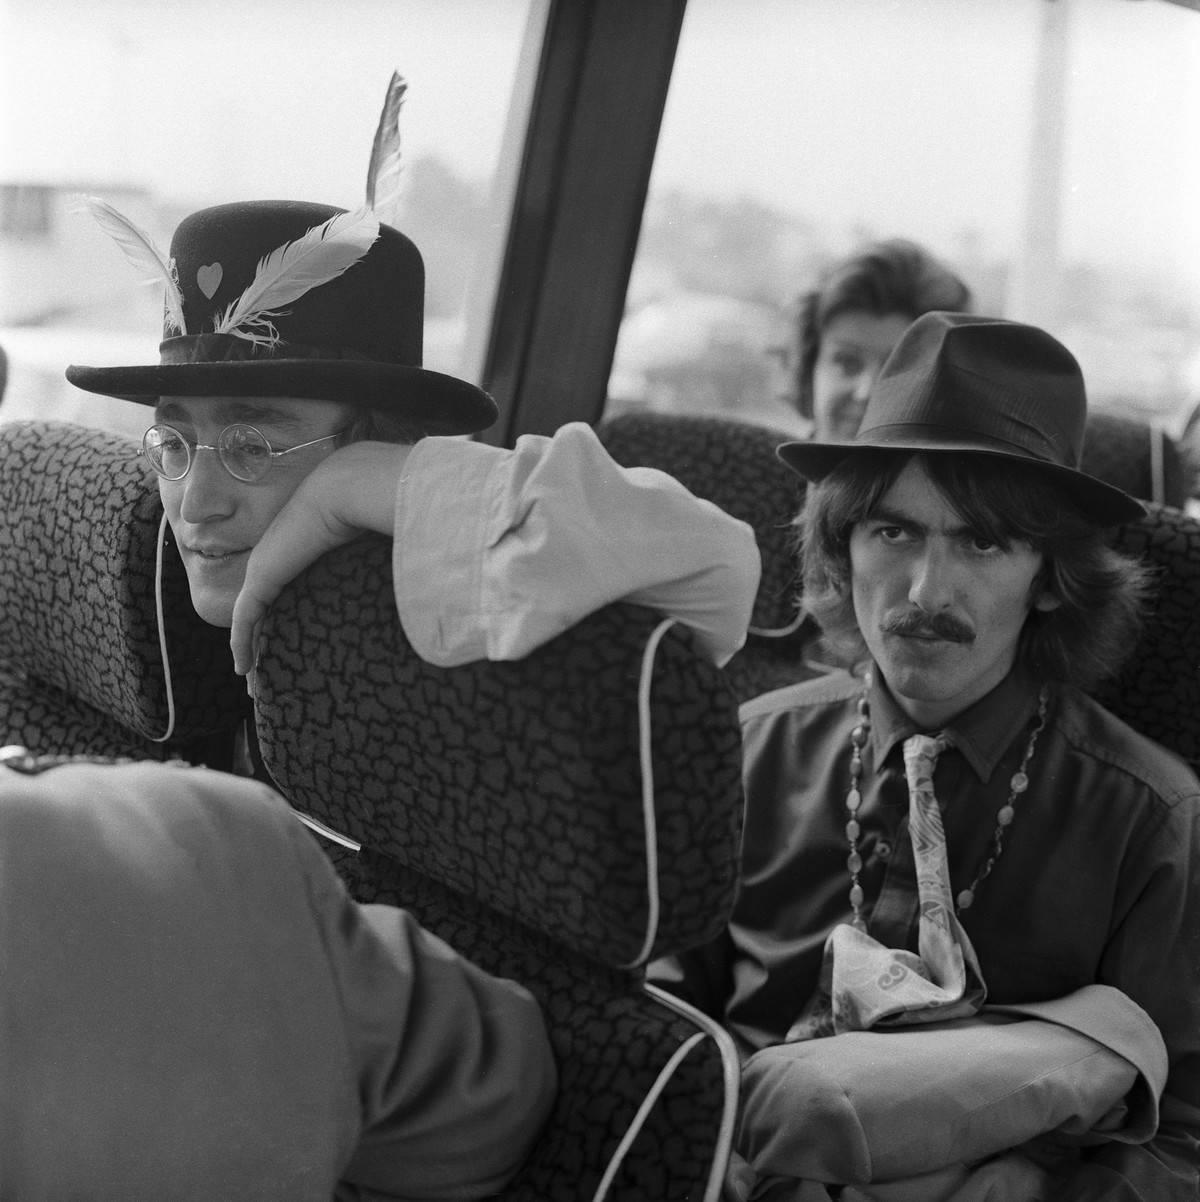 <p>In the mid-1960s, the British Invasion saw amazing bands such as The Beatles make their way to American soil. Here, Beatles guitarists John Lennon and George Harrison are seen in their tour bus, getting ready to film the <i>Magical Mystery Tour.</i></p> <p>While the film did not garner positive reviews, the soundtrack was met with critical acclaim.</p>